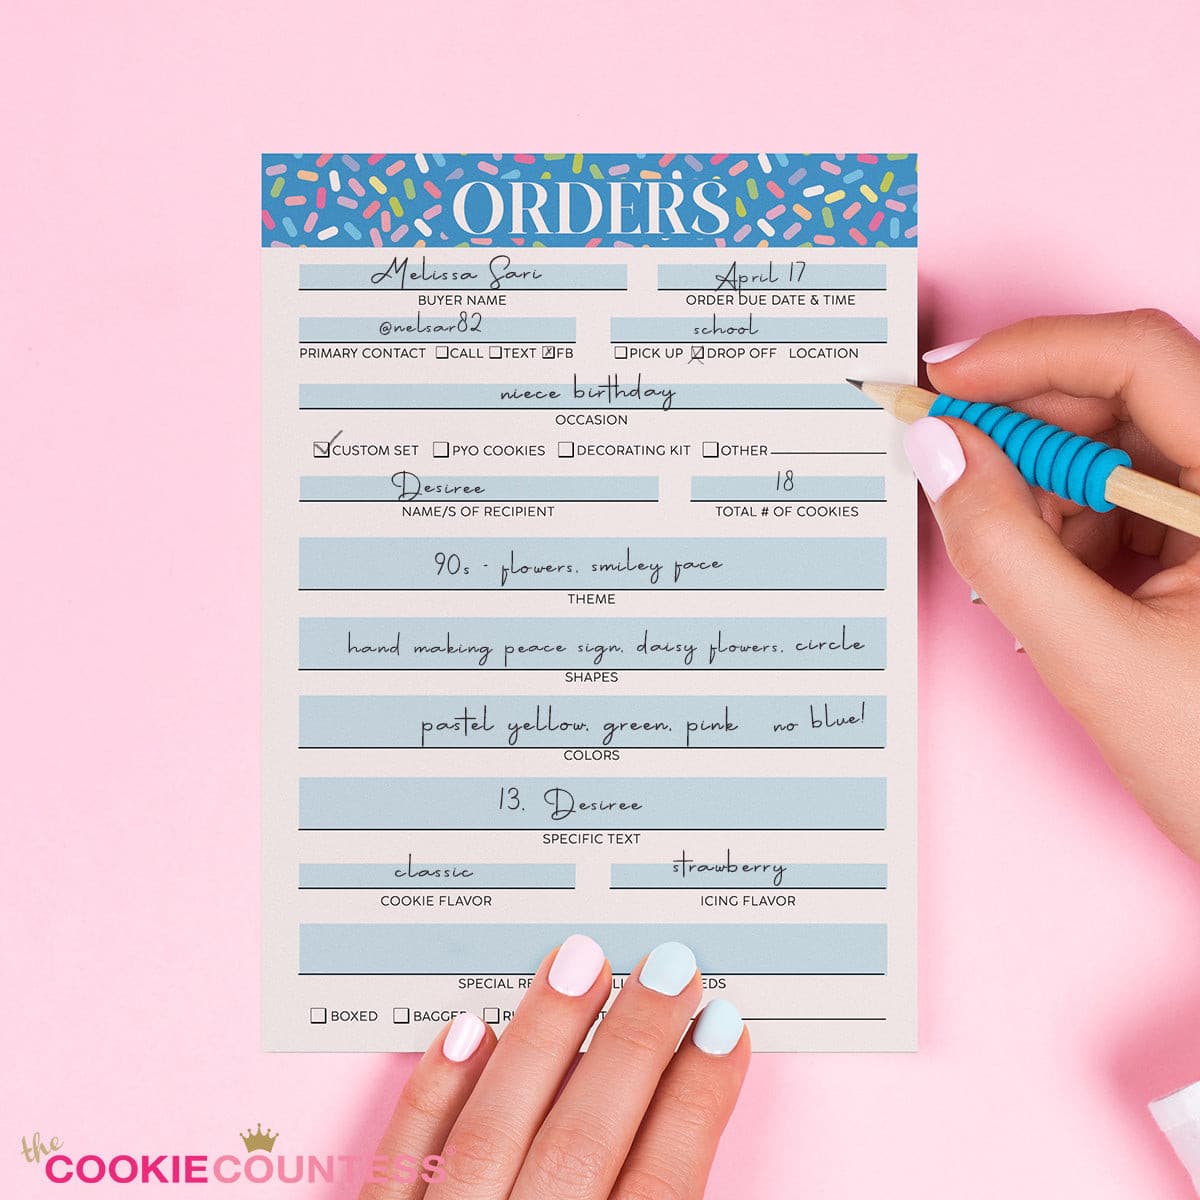 The Cookie Countess (cookie con) Cookie Order Form 5 x 7, 50 sheets